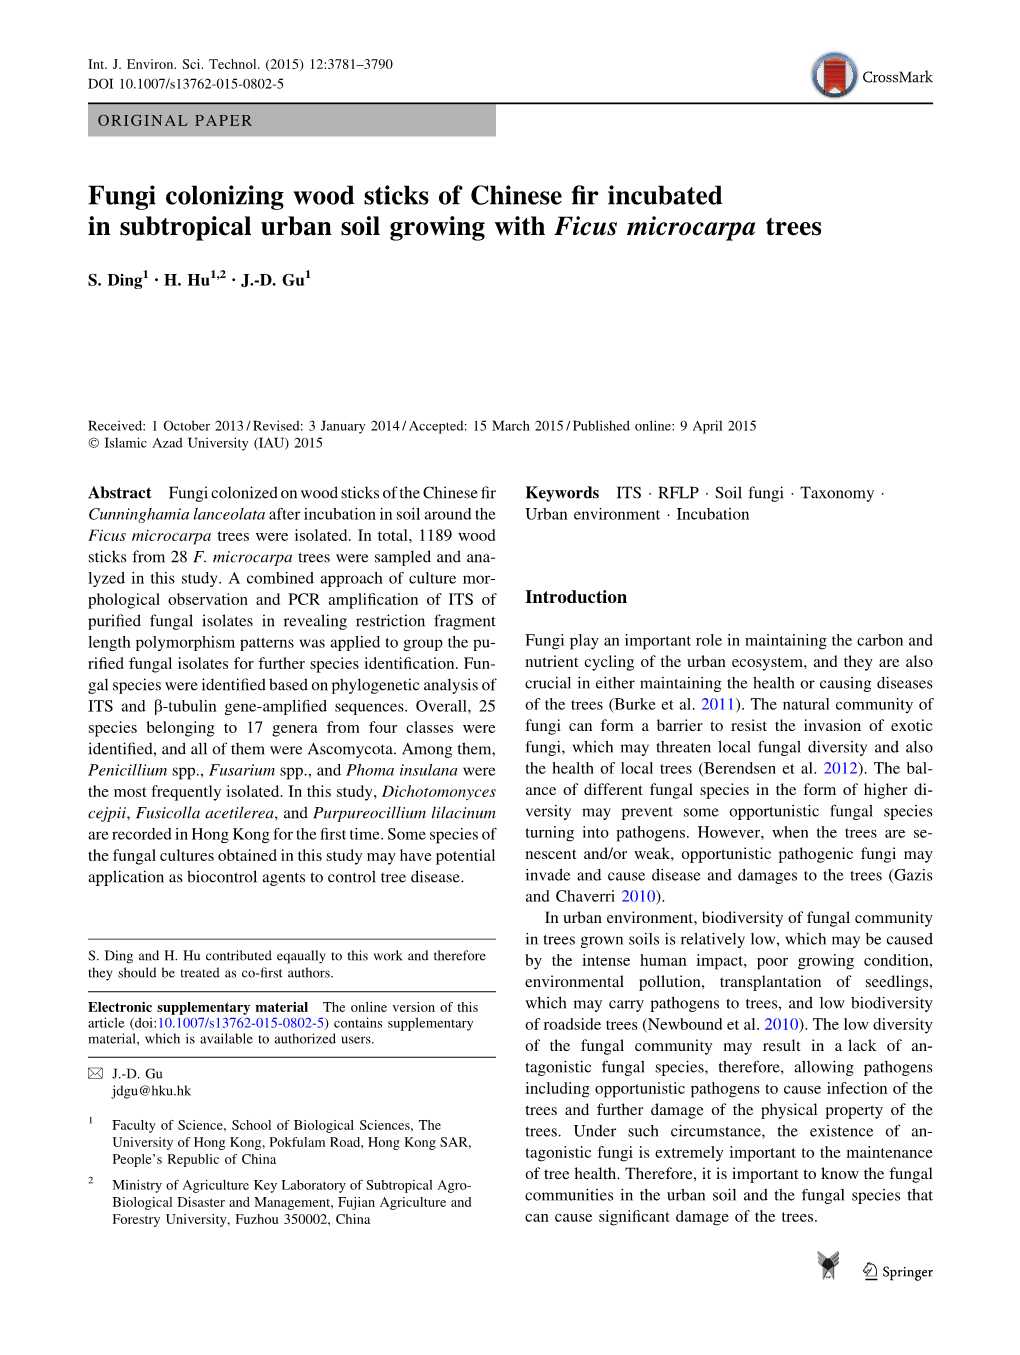 Fungi Colonizing Wood Sticks of Chinese Fir Incubated in Subtropical